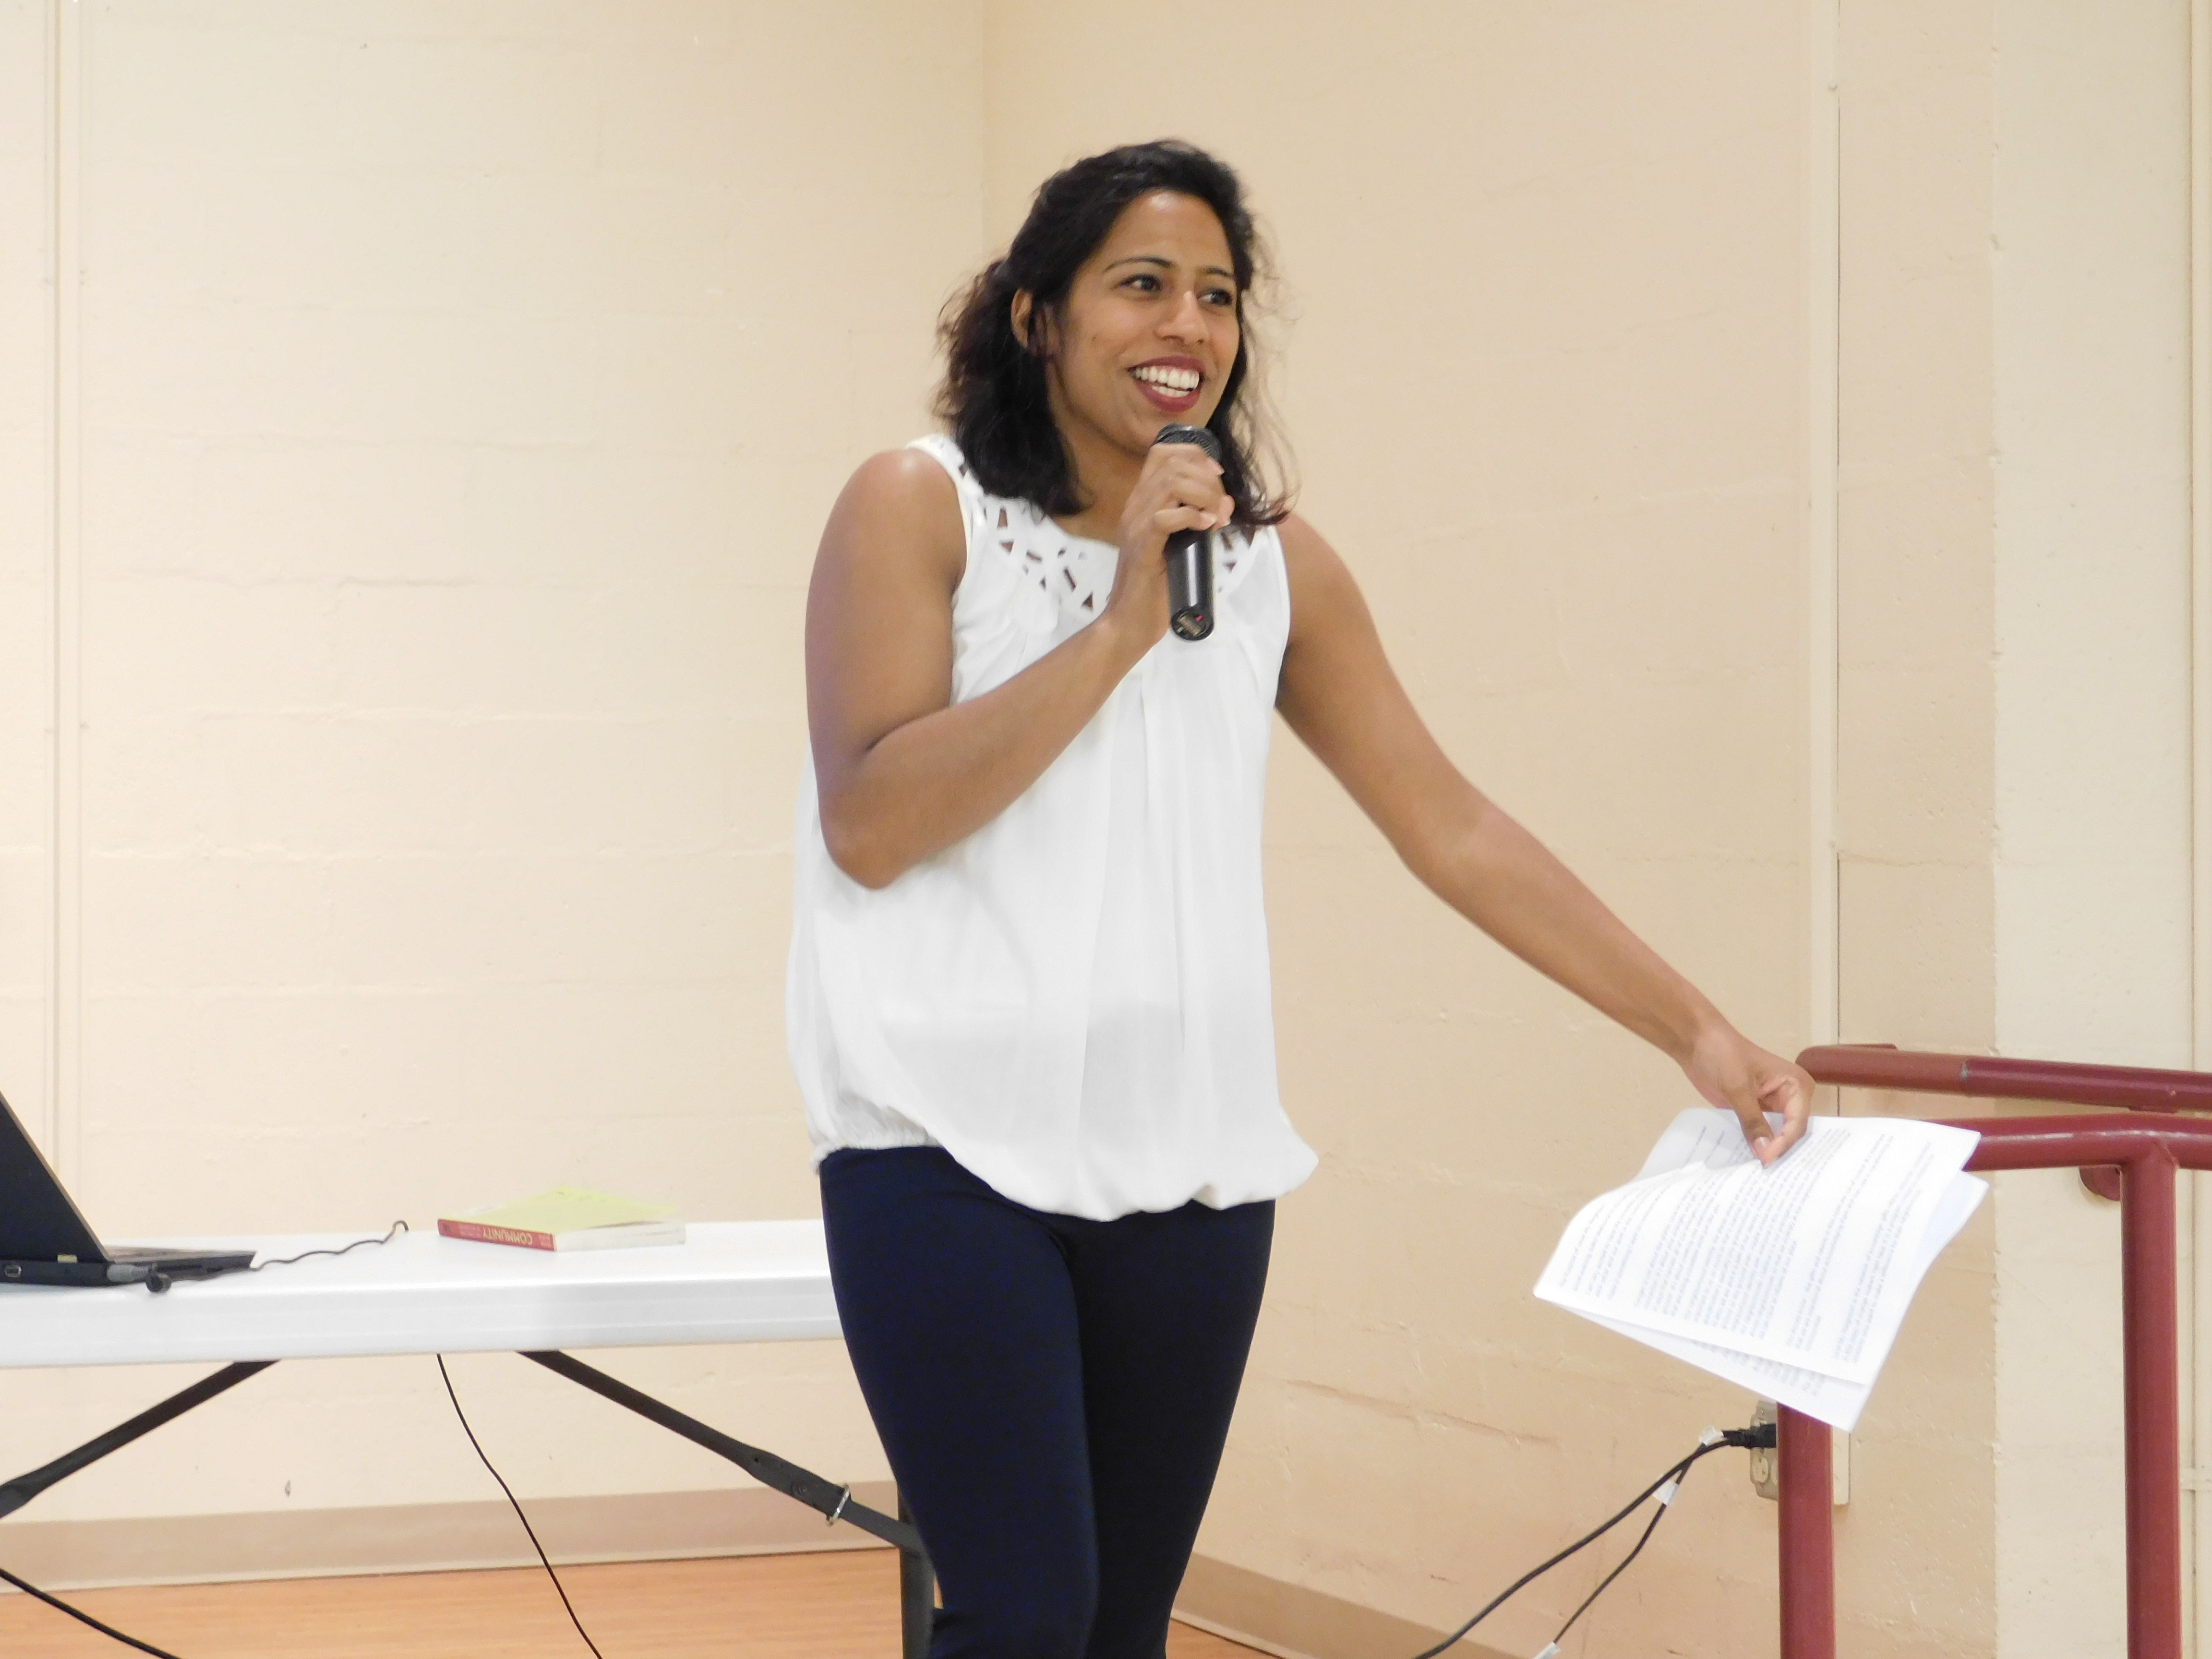 Please Join Us in Congratulating Shikha on Her New Position at Neighborhood Allies!